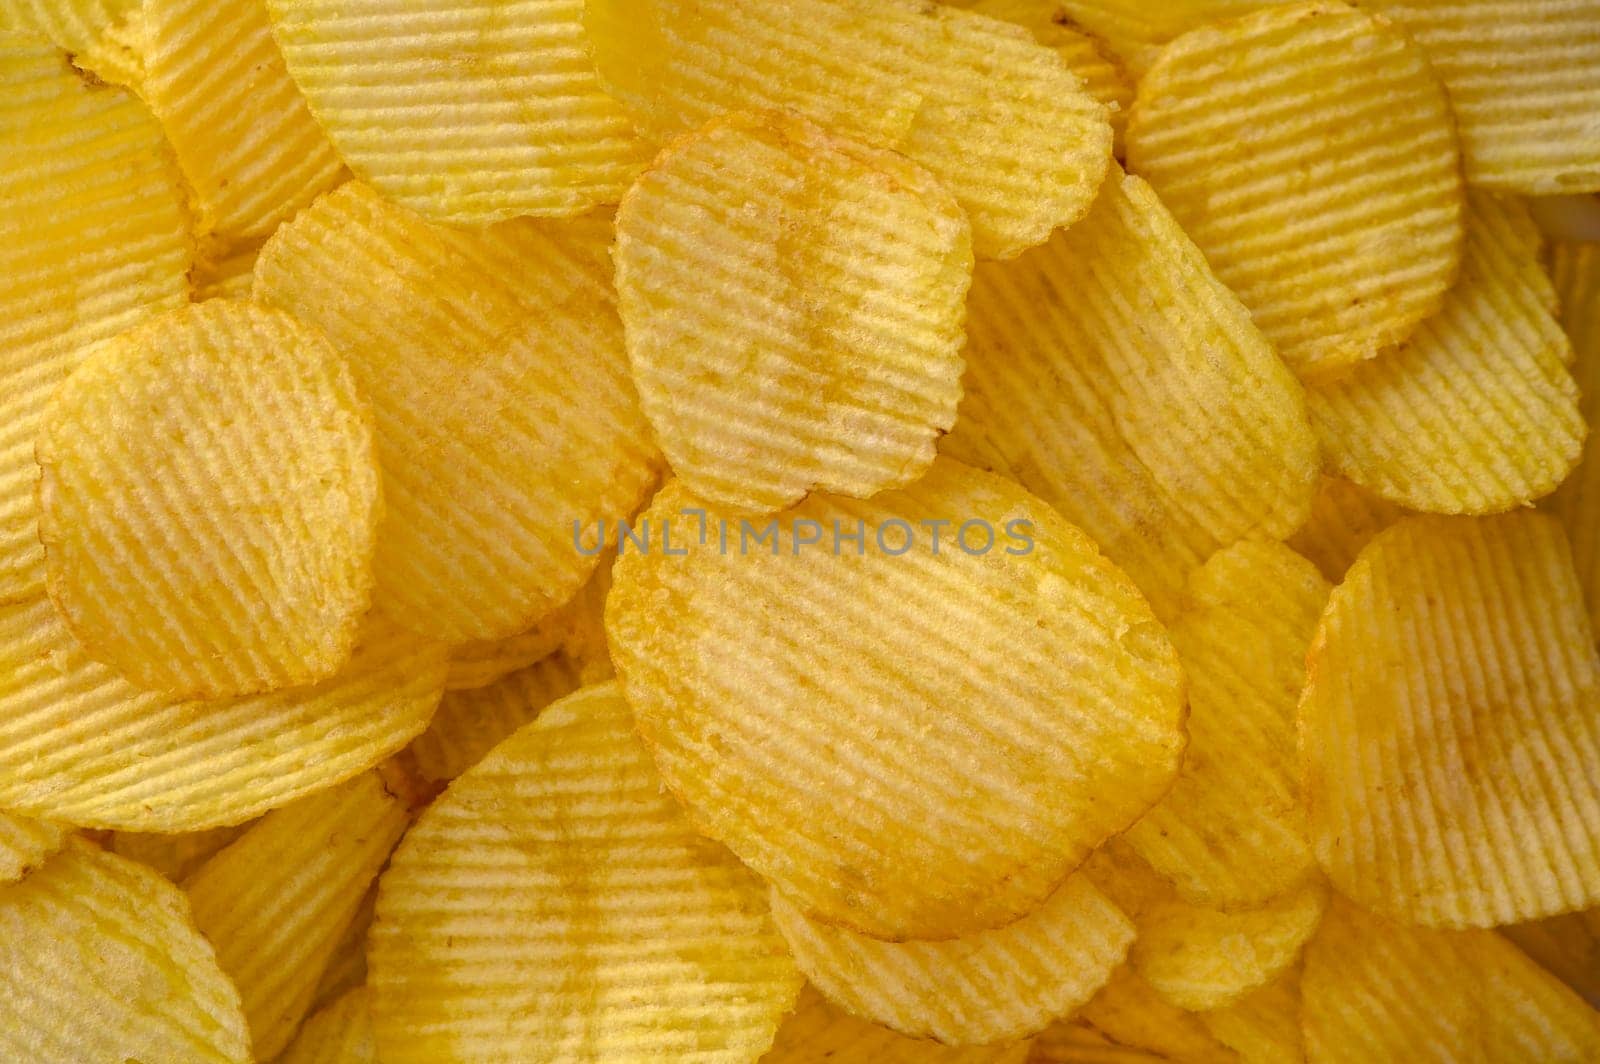 Close-up view of abundant crispy potato chips filling the frame for a textured background by Mixa74